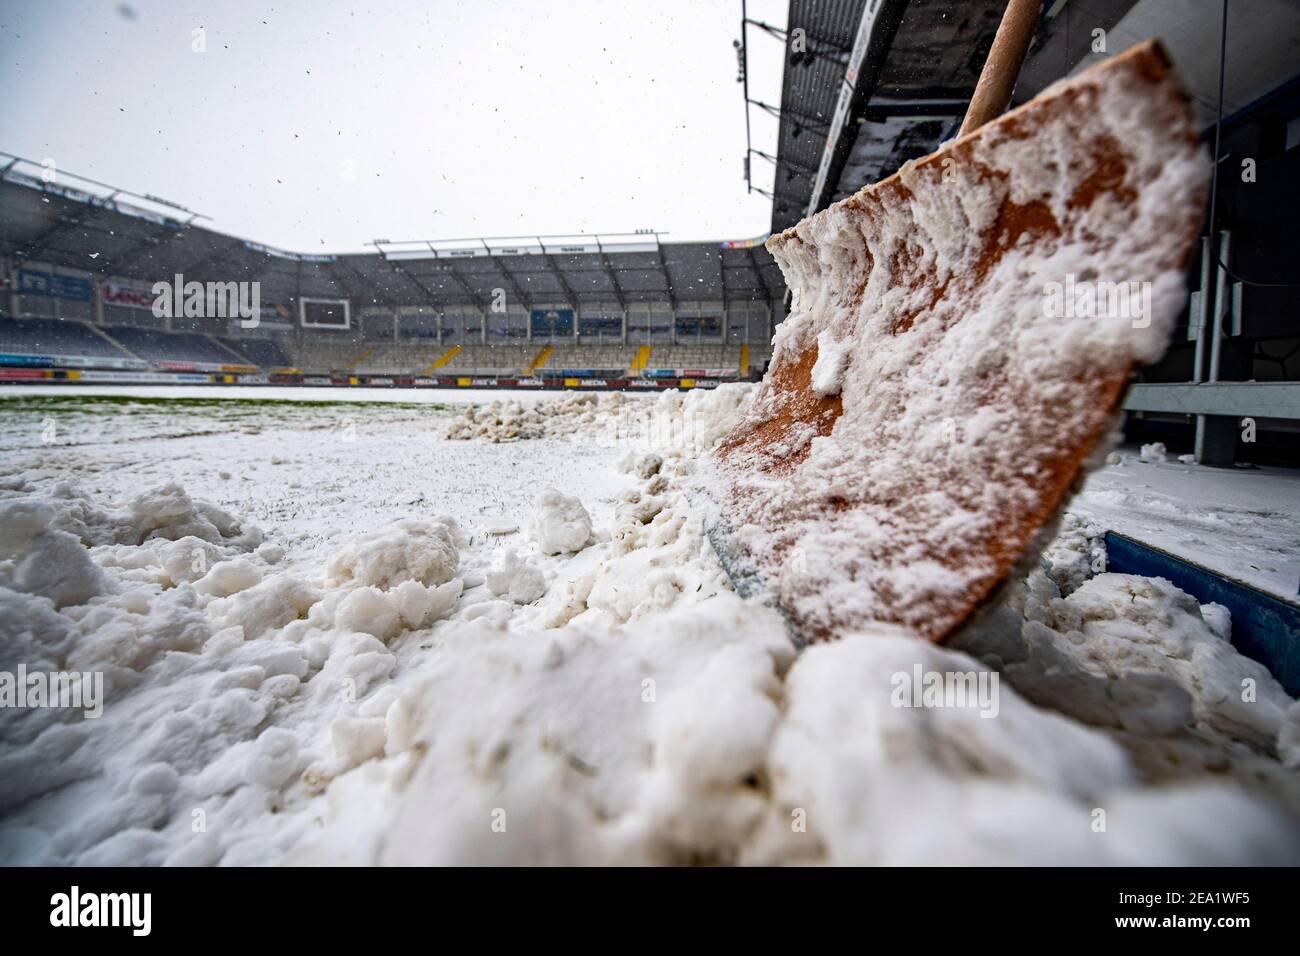 07 February 2021, North Rhine-Westphalia, Paderborn: Football: 2. Bundesliga, SC Paderborn 07 - 1. FC Heidenheim, Matchday 20, at Benteler Arena. A shovel stands by the coach's bench, chunks of snow lie on the side of the pitch. Helpers had been clearing the pitch of snow since early morning. Due to the heavy snowfall, the match was nevertheless cancelled shortly before kick-off. Photo: David Inderlied/dpa - IMPORTANT NOTE: In accordance with the regulations of the DFL Deutsche Fußball Liga and/or the DFB Deutscher Fußball-Bund, it is prohibited to use or have used photographs taken in the sta Stock Photo